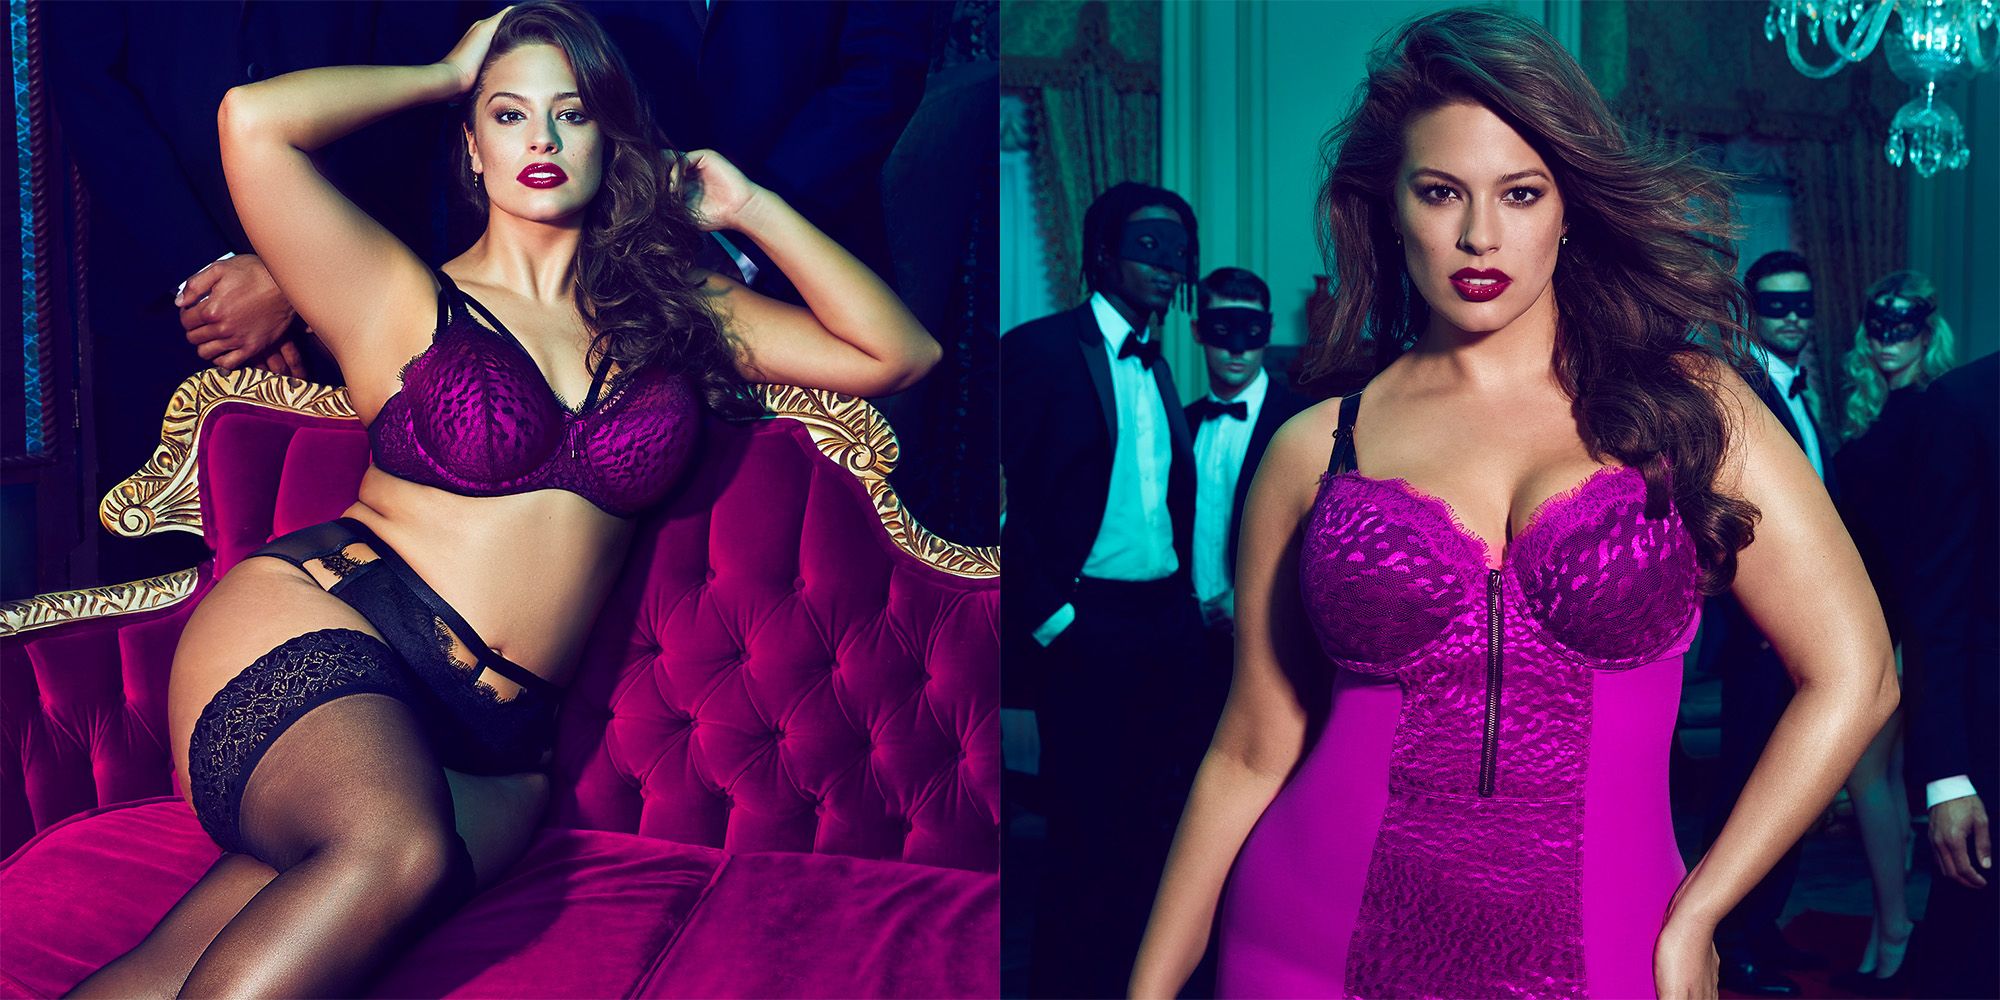 Ashley Graham looks sensational in lace lingerie as she strips off